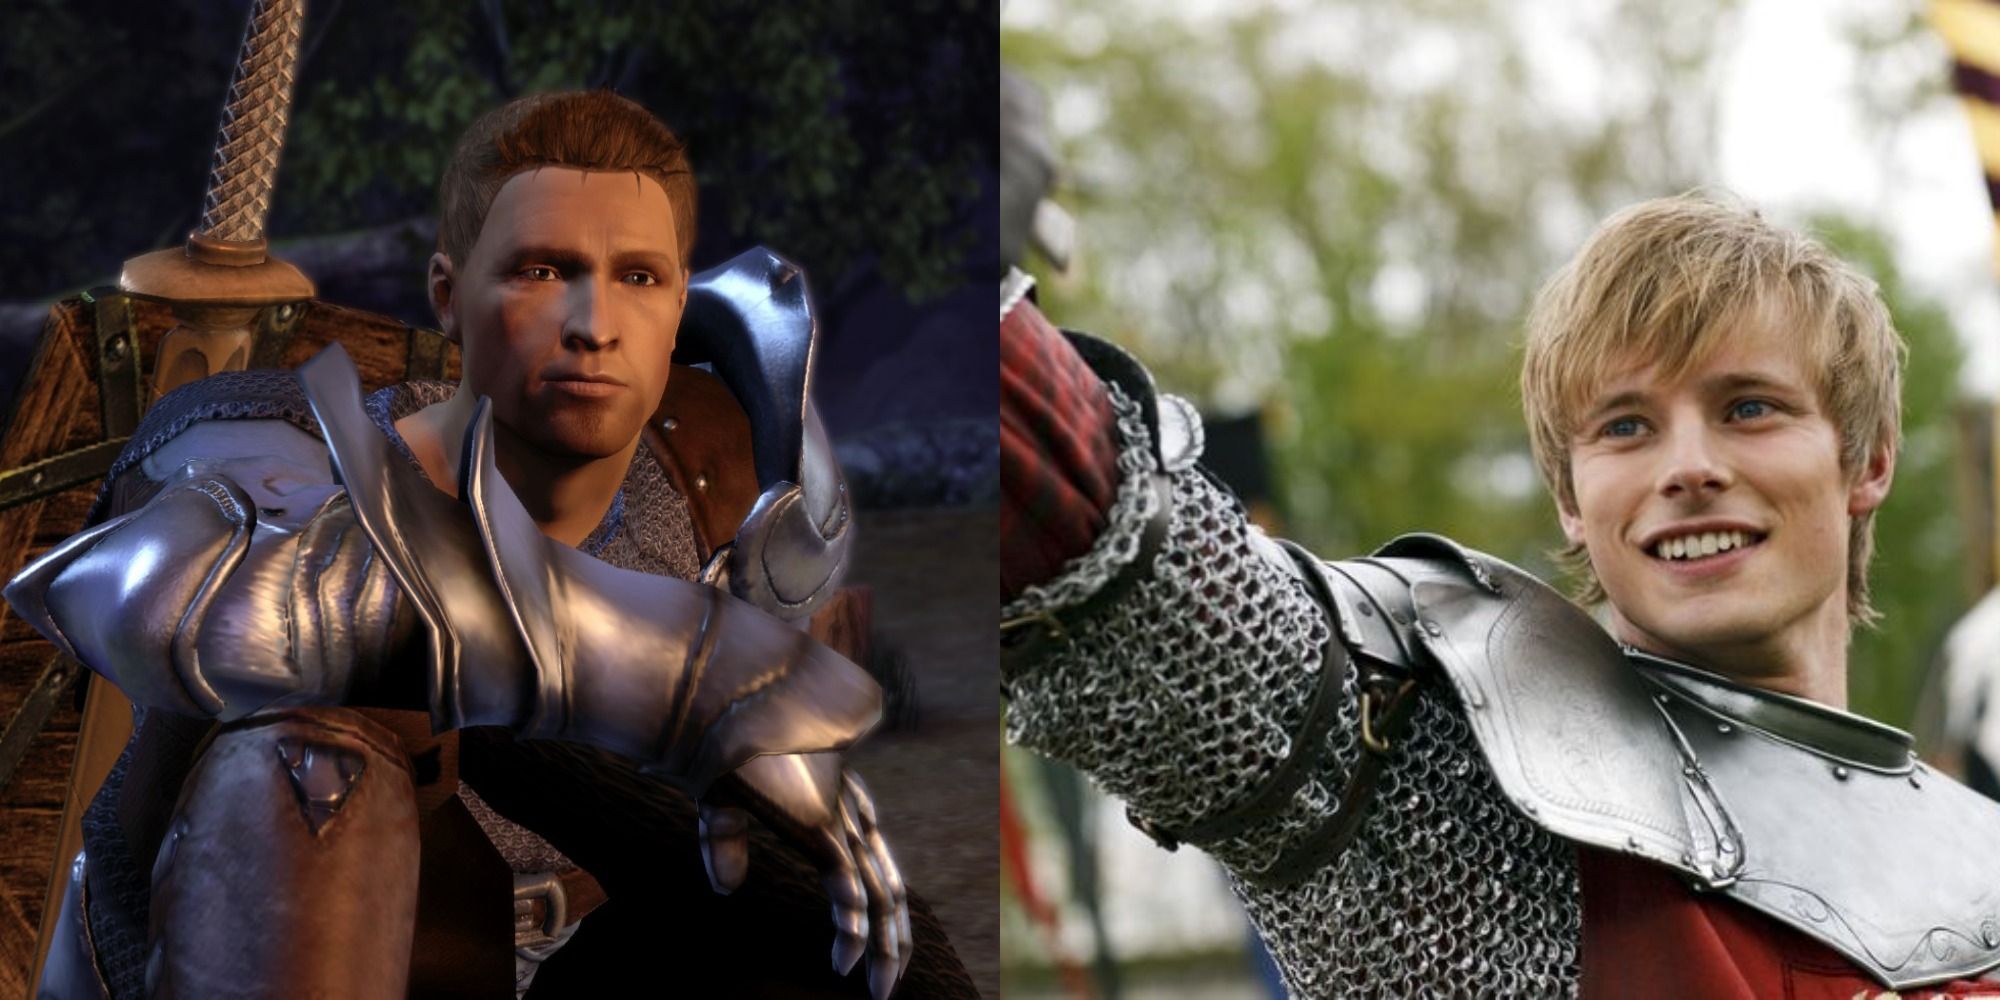 10 Fan Casts For A LiveAction Dragon Age (According To Reddit)